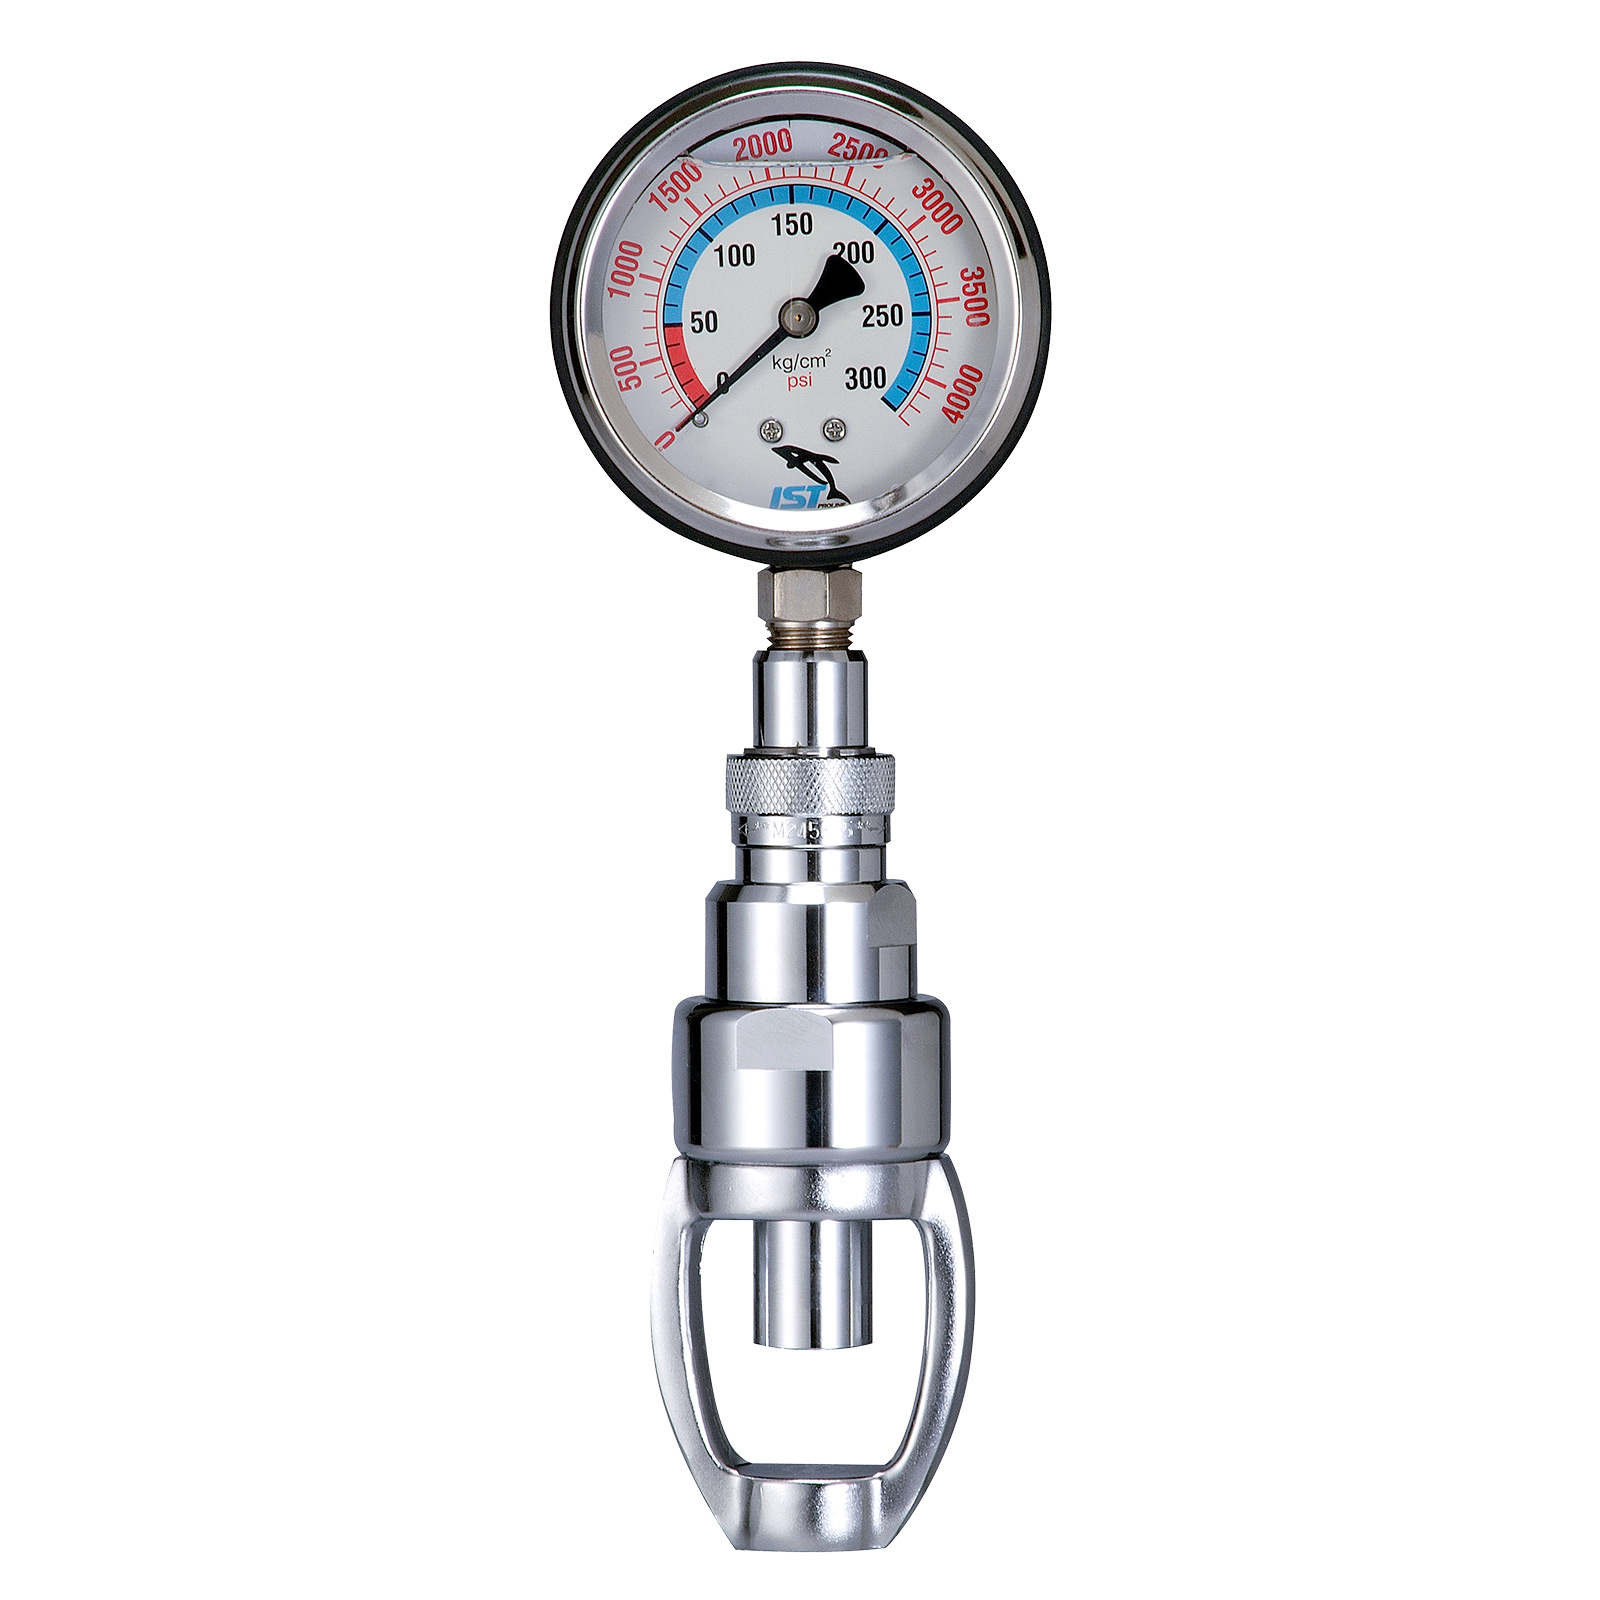 IST Diving System :: RECREATIONAL :: HARD GEAR aCCESSORIES :: Quick Connect YOKE  tank Pressure Gauge